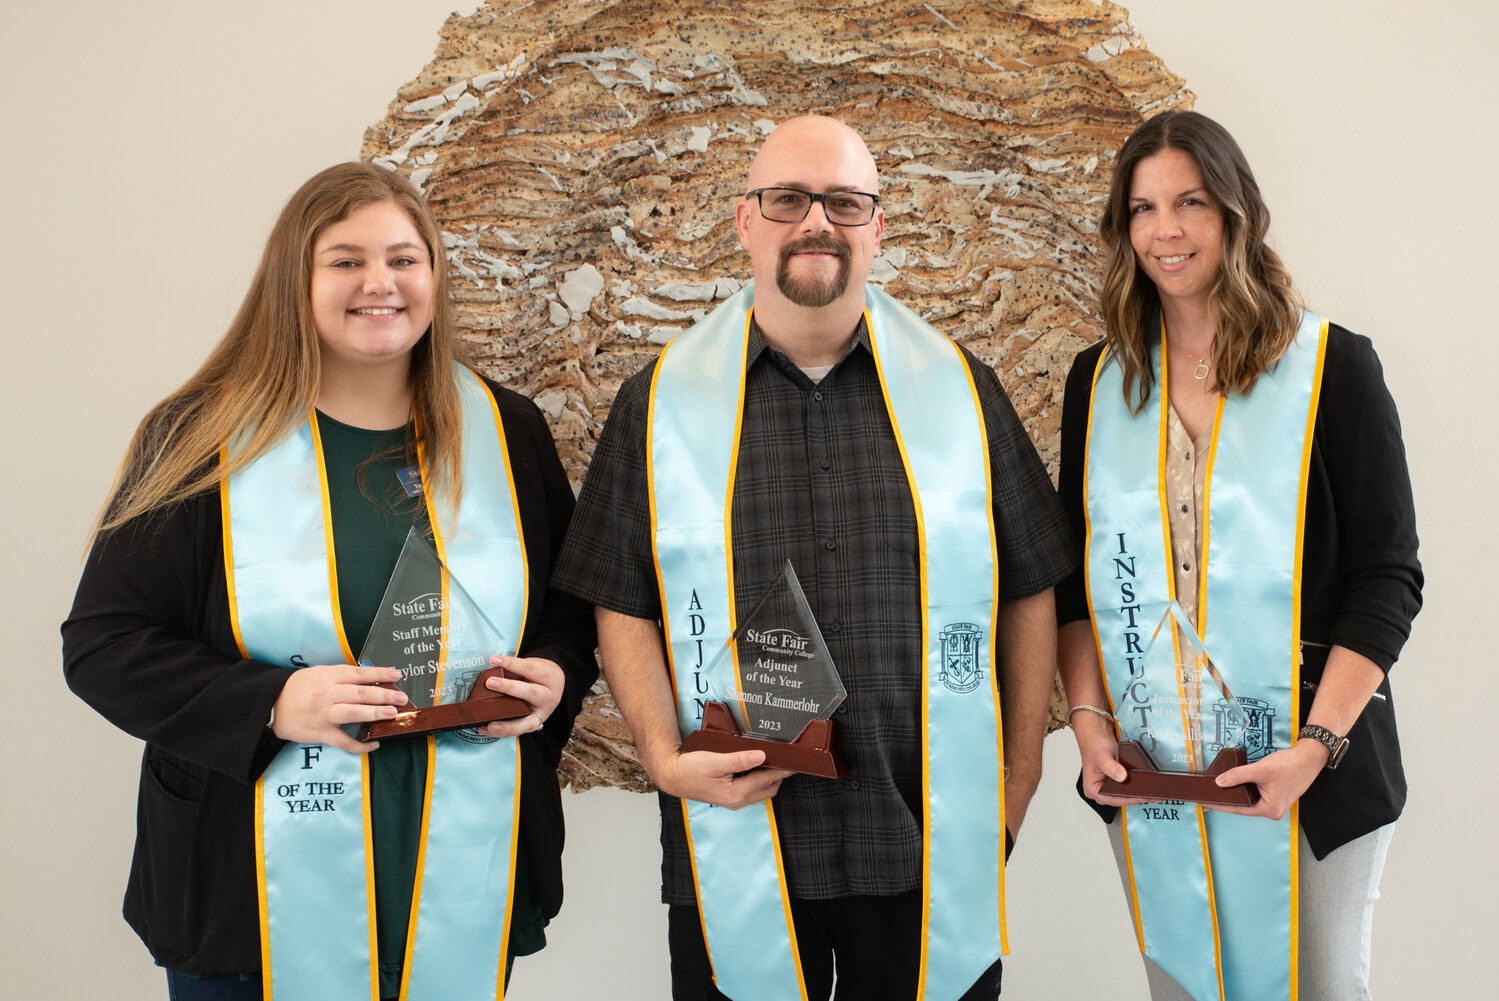 State Fair Community College announced on April 28 the 2023 Instructor, Adjunct and Staff Member of the Year recipients. From left, Taylor Stevenson, Staff of the Year; Shannon Kammerlohr, Adjunct of the Year, and Kayla Allison, Instructor of the Year. Students nominate and select the winners of these prestigious awards